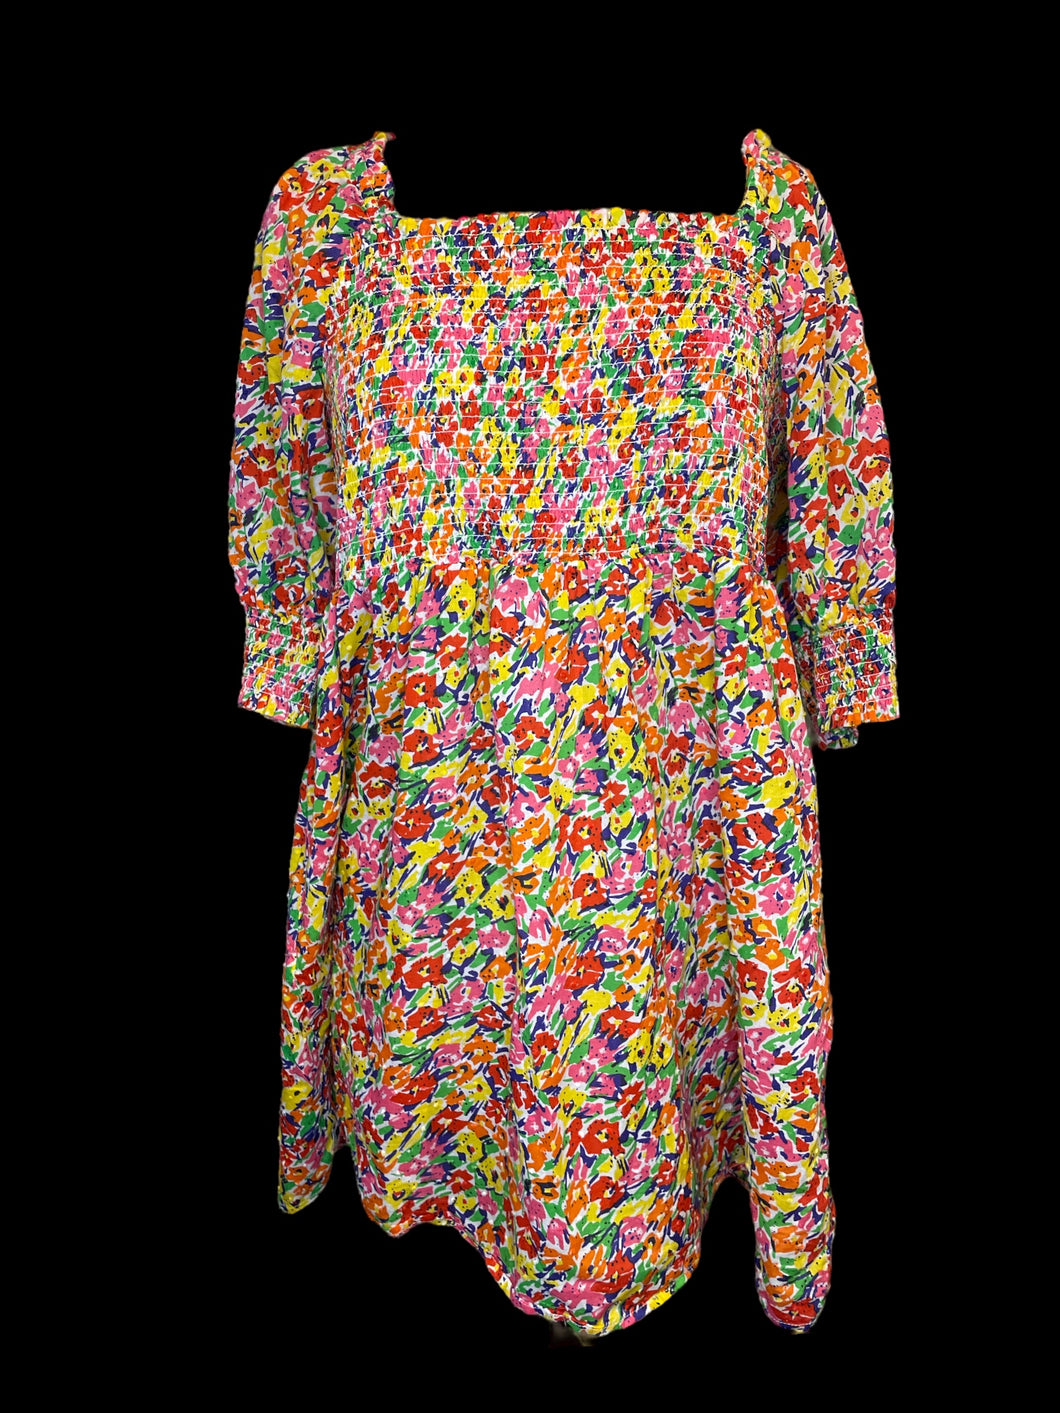 XL Multicolor balloon short sleeve dress w/ floral pattern, pockets, & shirred bust